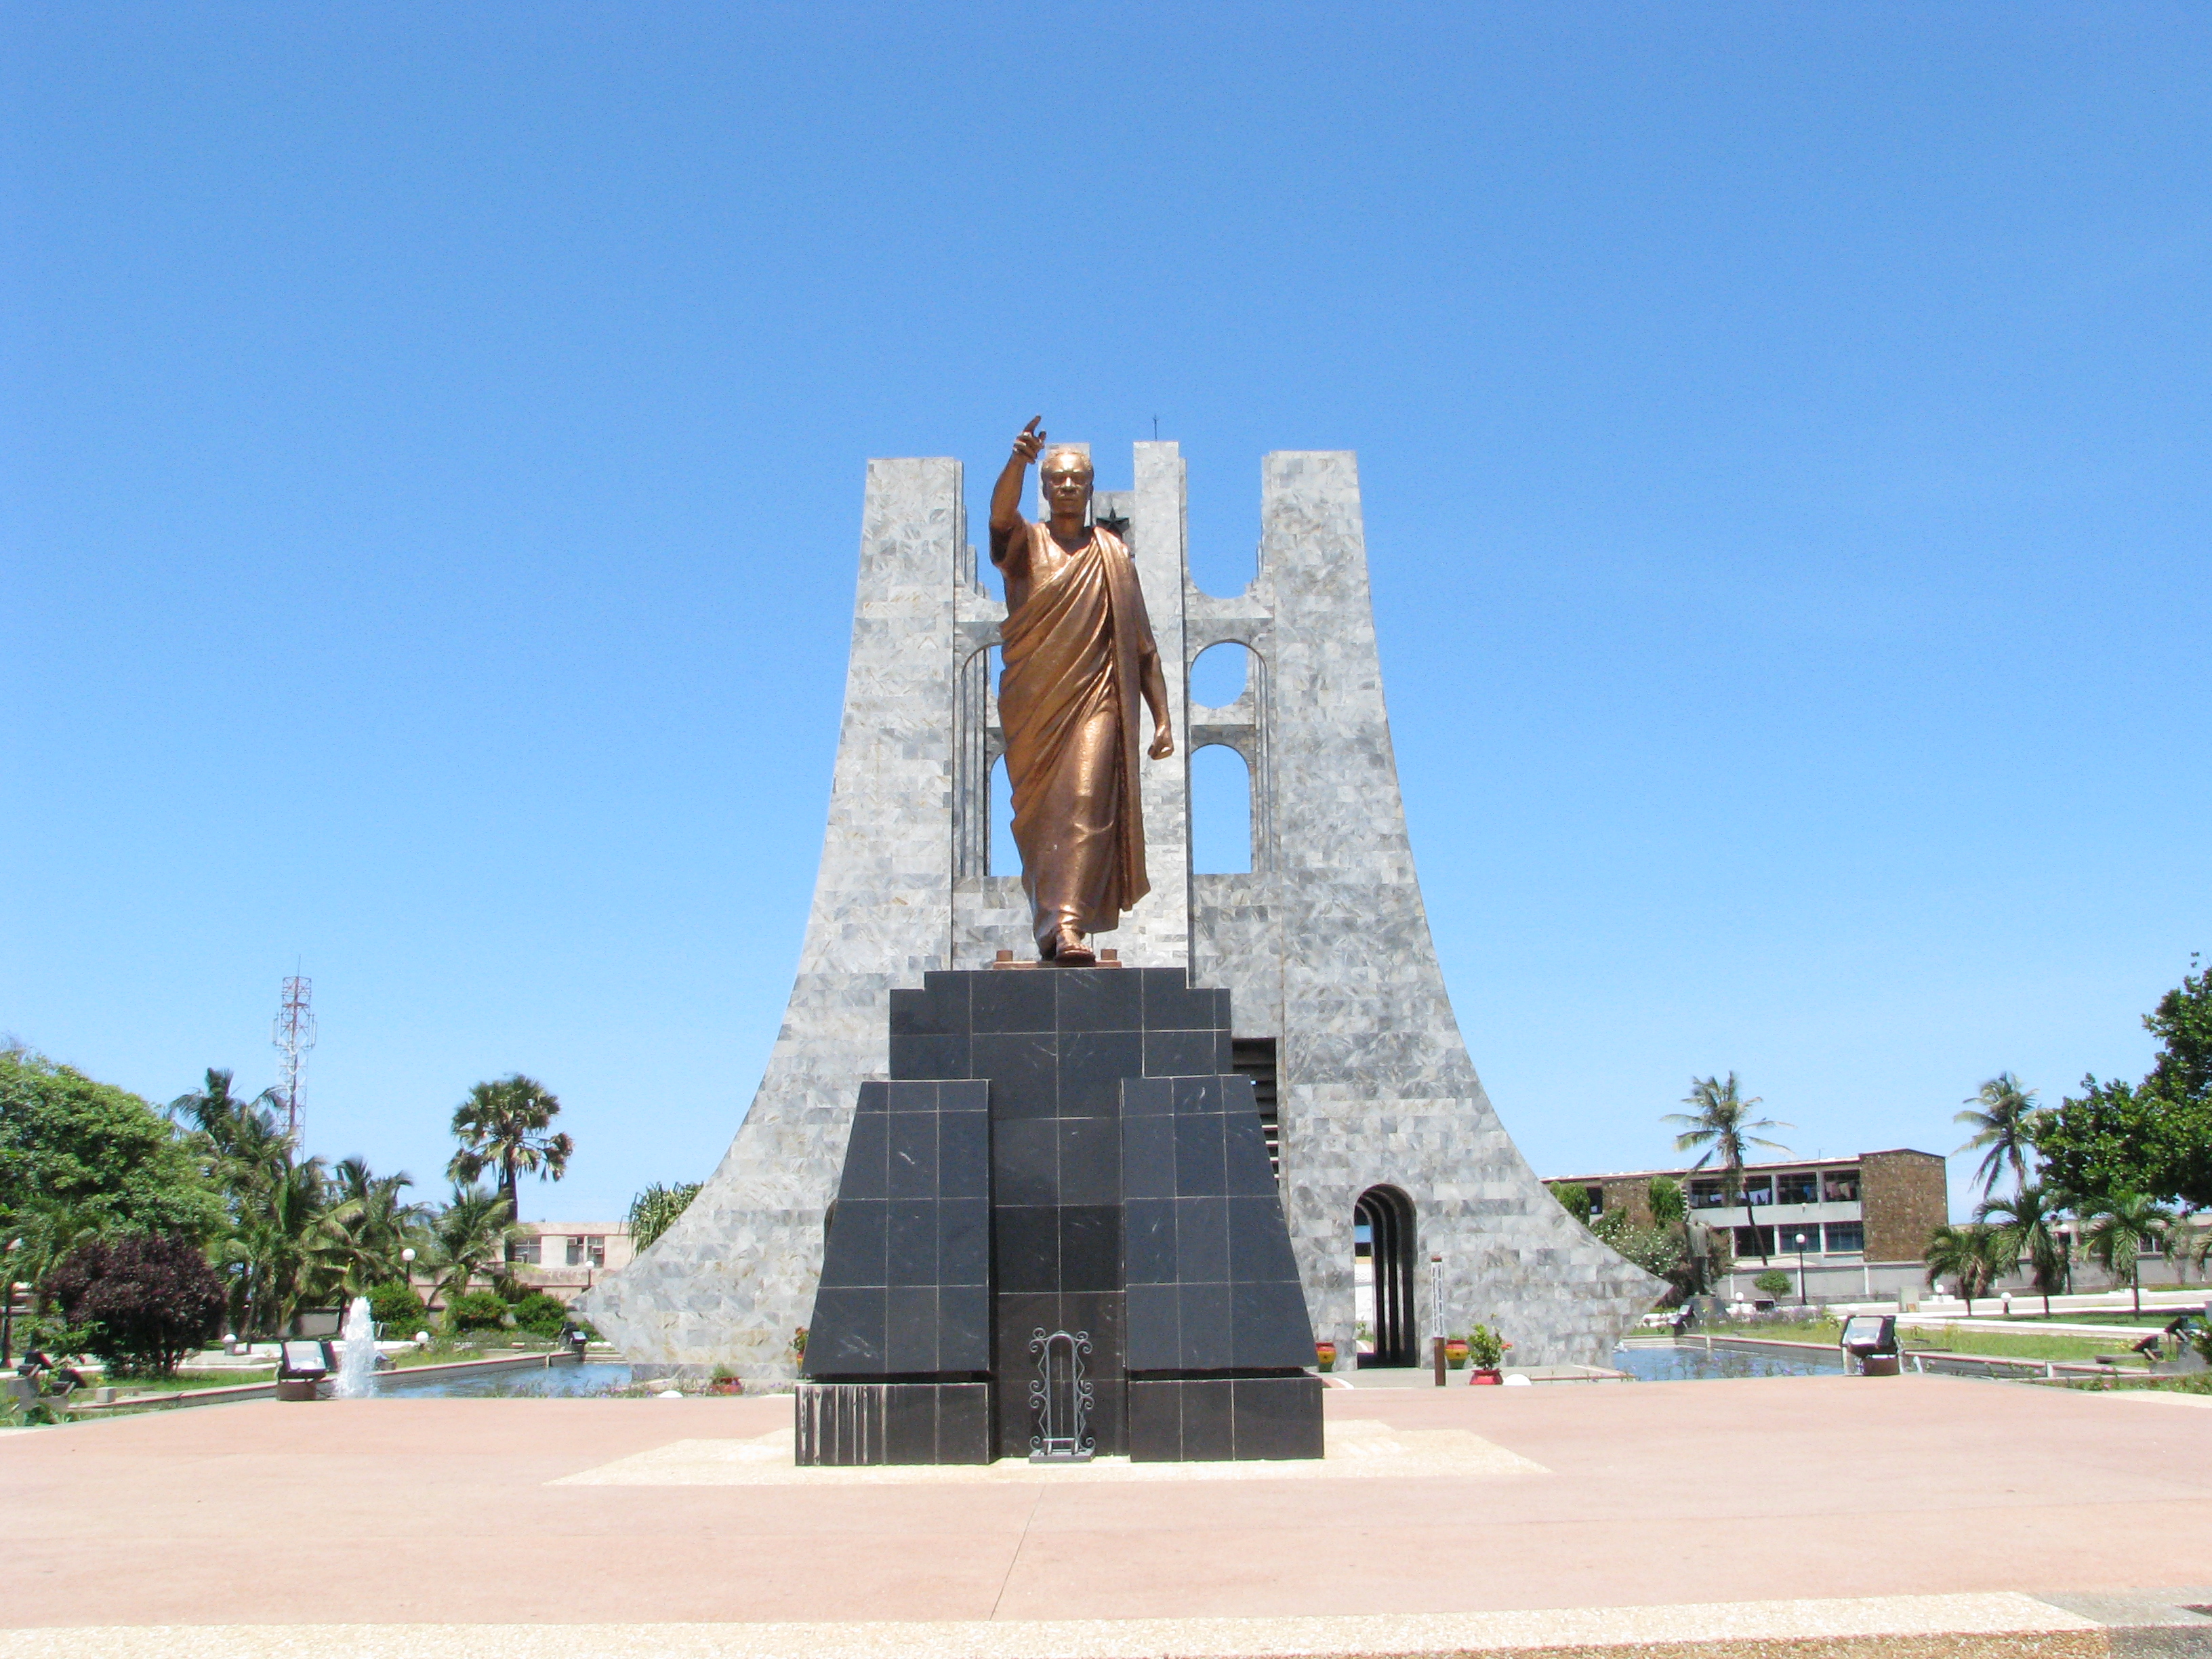 A gold colored statue of Kwame Nkrumah with his arm raised pointing forward